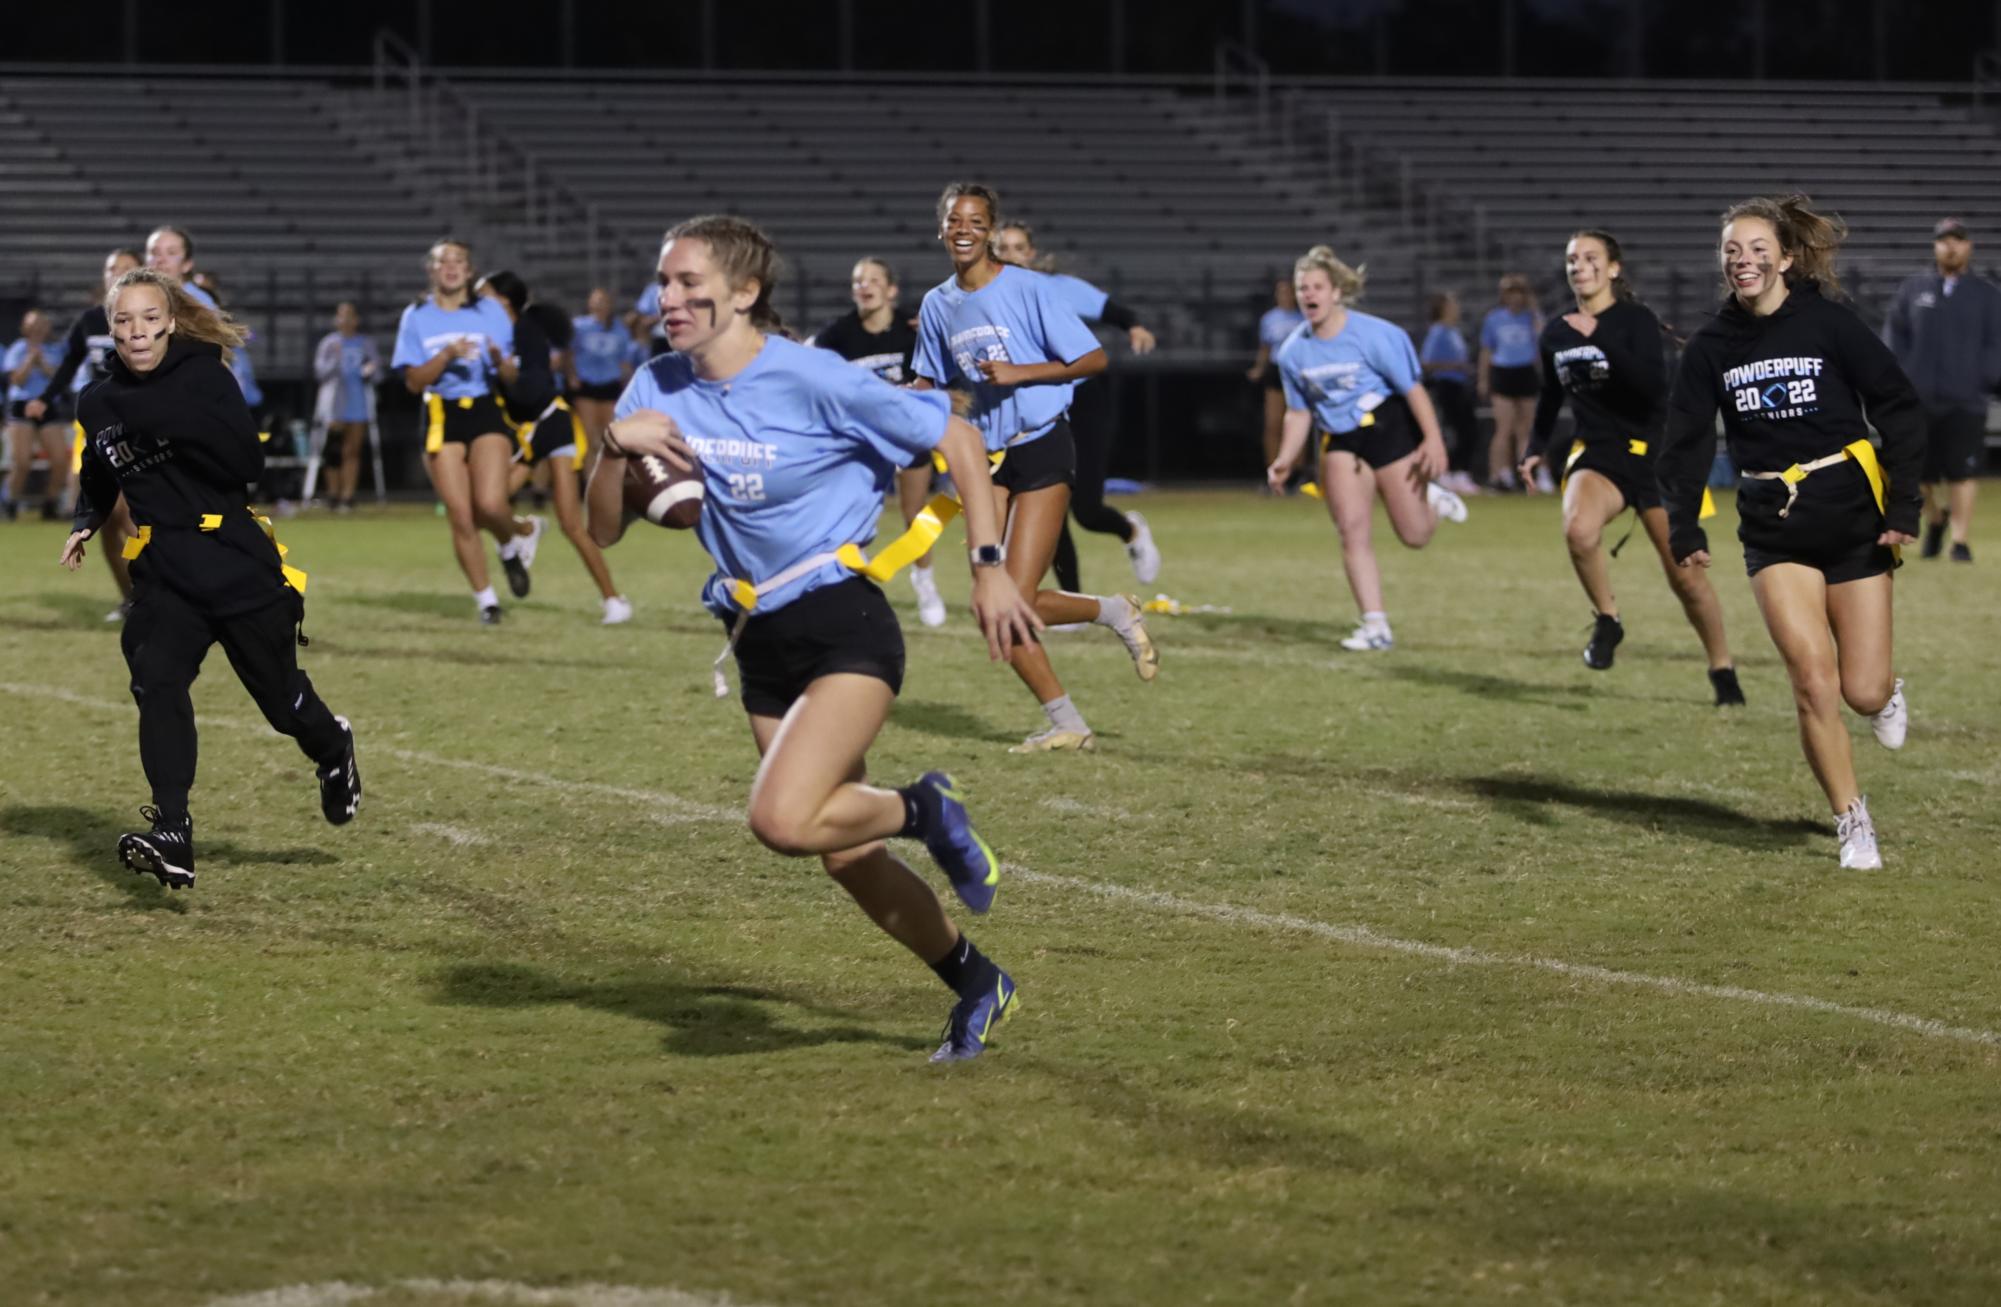 Senior Reagan Varvarigos rushing down the field ahead of the defense, as part of the 2022 powderpuff game. Varvarigos is a varsity soccer player, and will play her third season this year. I think that having a flag football team is a really good opportunity for girls who are interested in football, but wouldnt feel comfortable with typical tackle football.